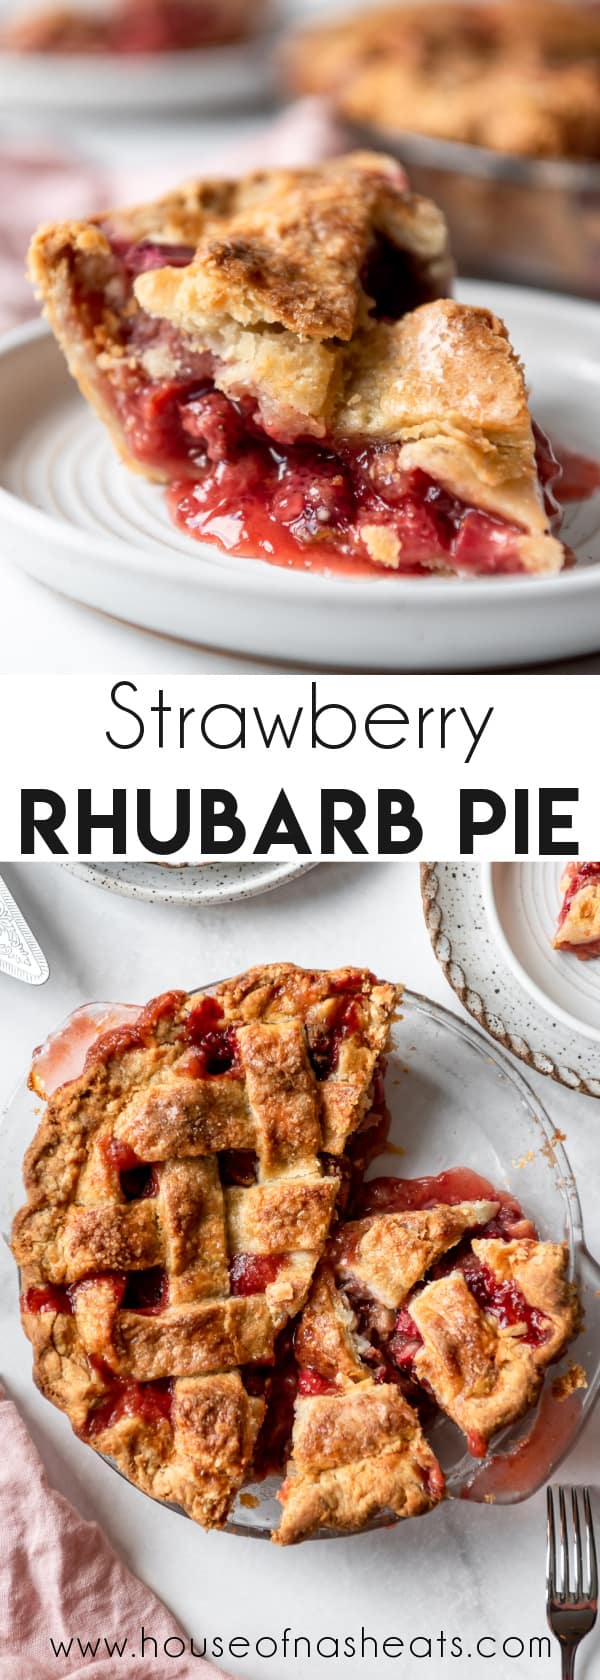 A collage of strawberry rhubarb pie images with text overlay.